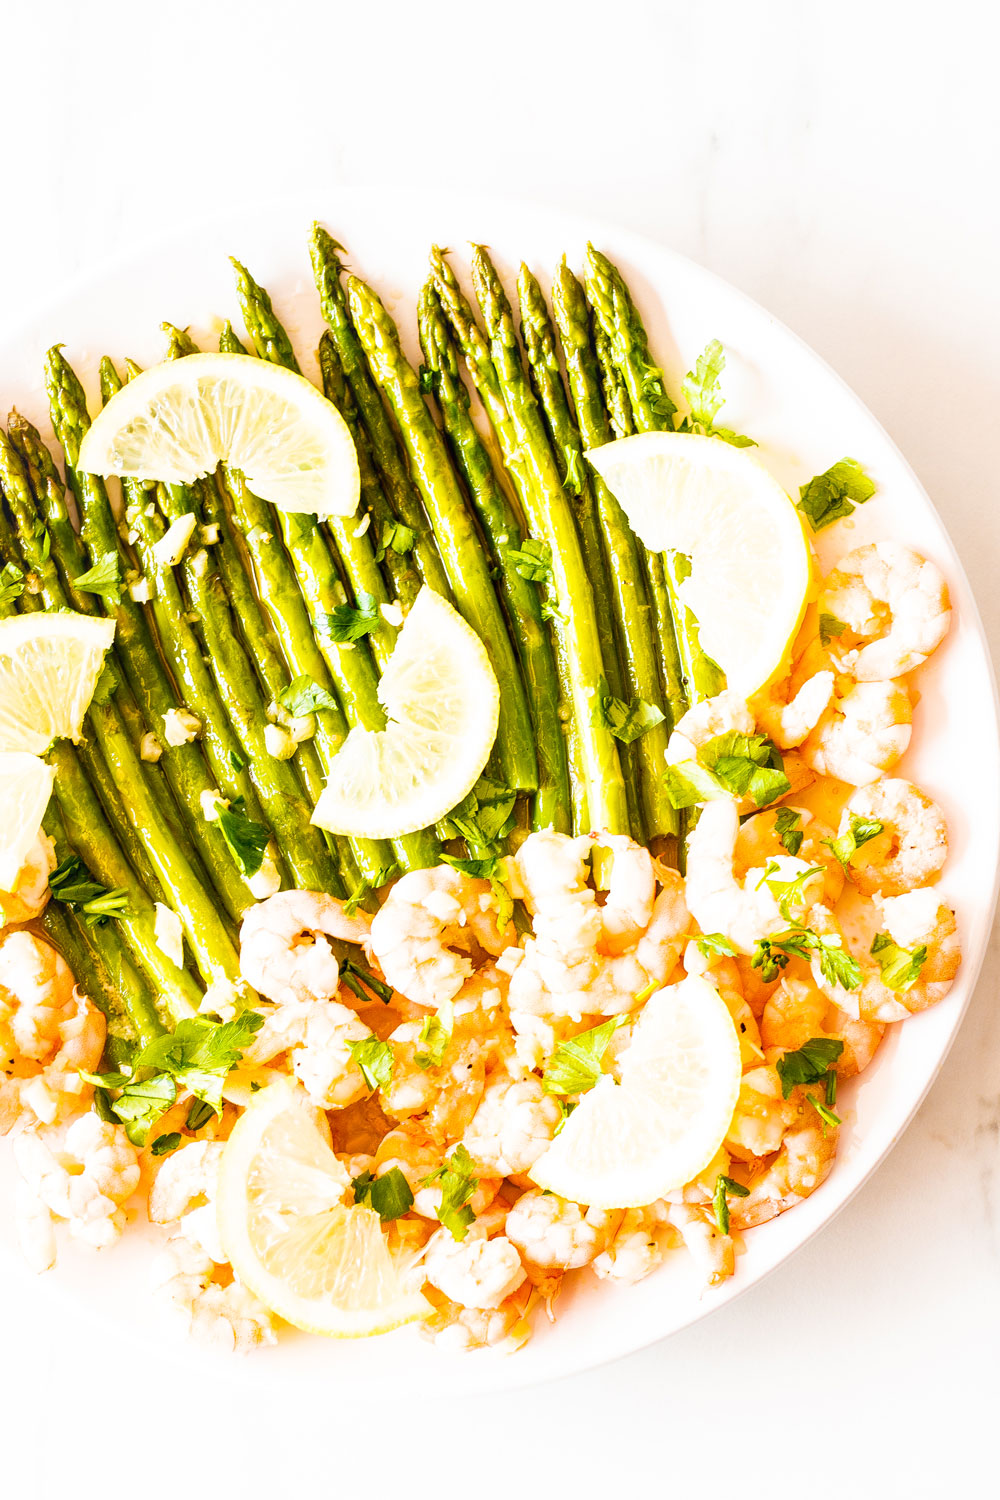 This Sauteed Garlic Shrimp with Asparagus recipe is perfect for a healthy, quick, and delicious dinner! It's packed with vitamins, minerals, protein, and fiber, and it's going to become your new favorite seafood dish! https://www.spotebi.com/recipes/sauteed-garlic-shrimp-asparagus/